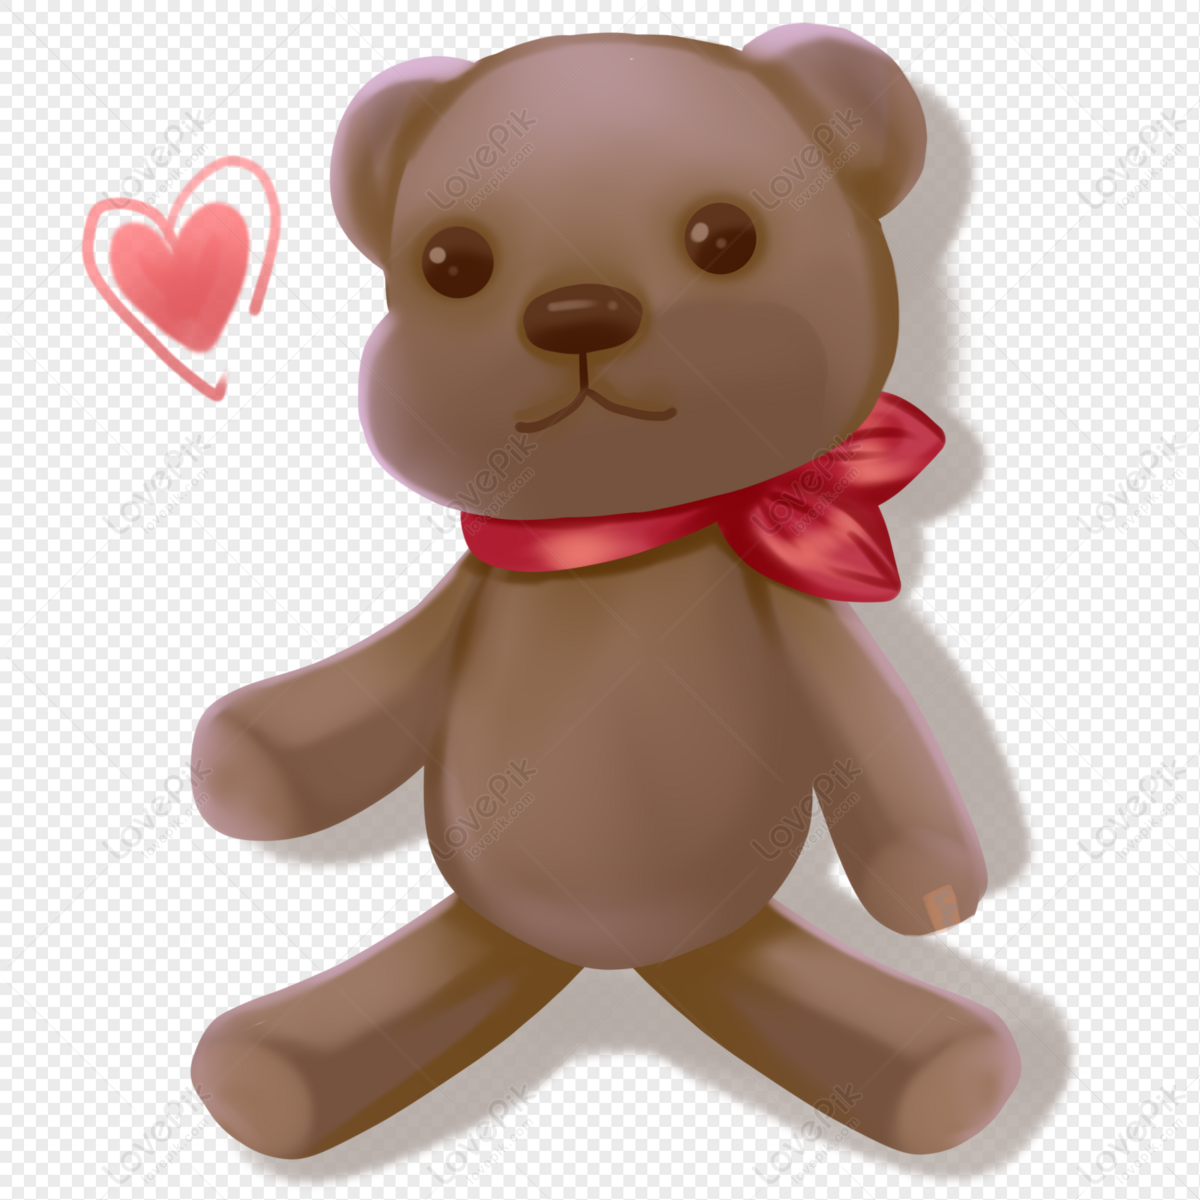 Teddy Bear PNG Images With Transparent Background | Free Download ...